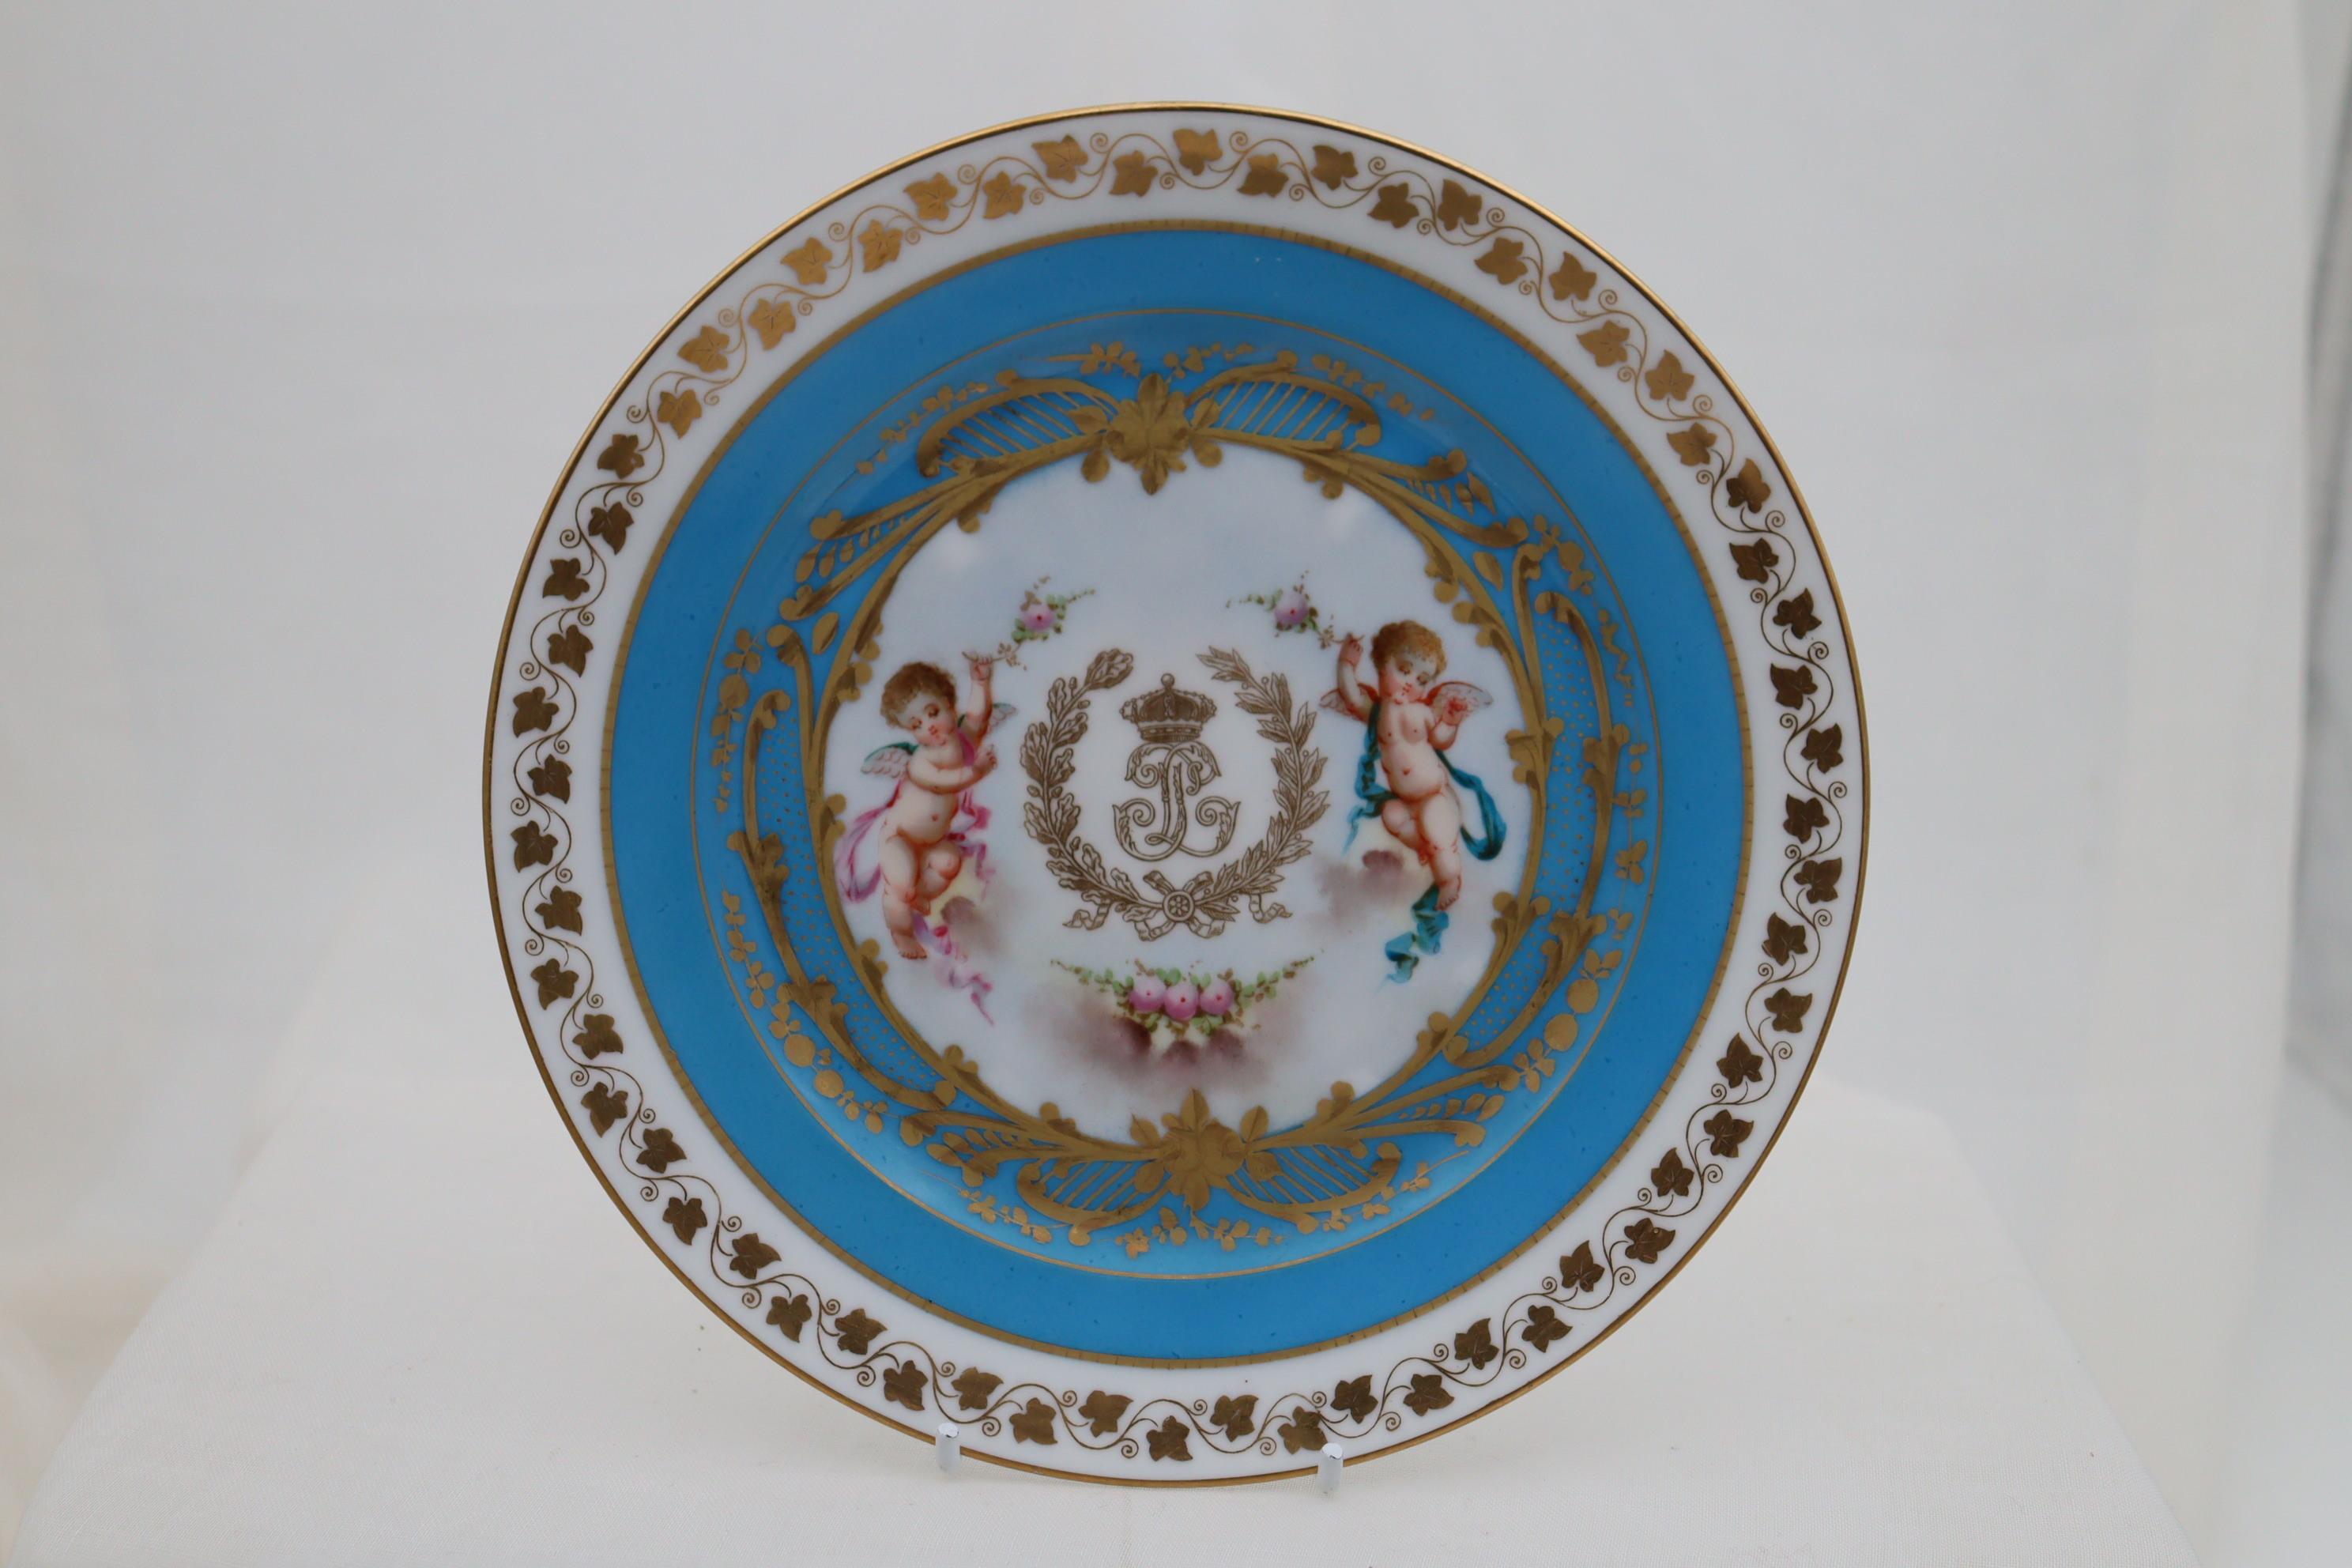 This pair of small Sevres hand painted plates are decorated to the centre with the gilt monogram under a crown, signifying King Louis Phillippe 1 (1773-1850) who reigned as King of France from 1830-1848. Either side of the initials are cherubs